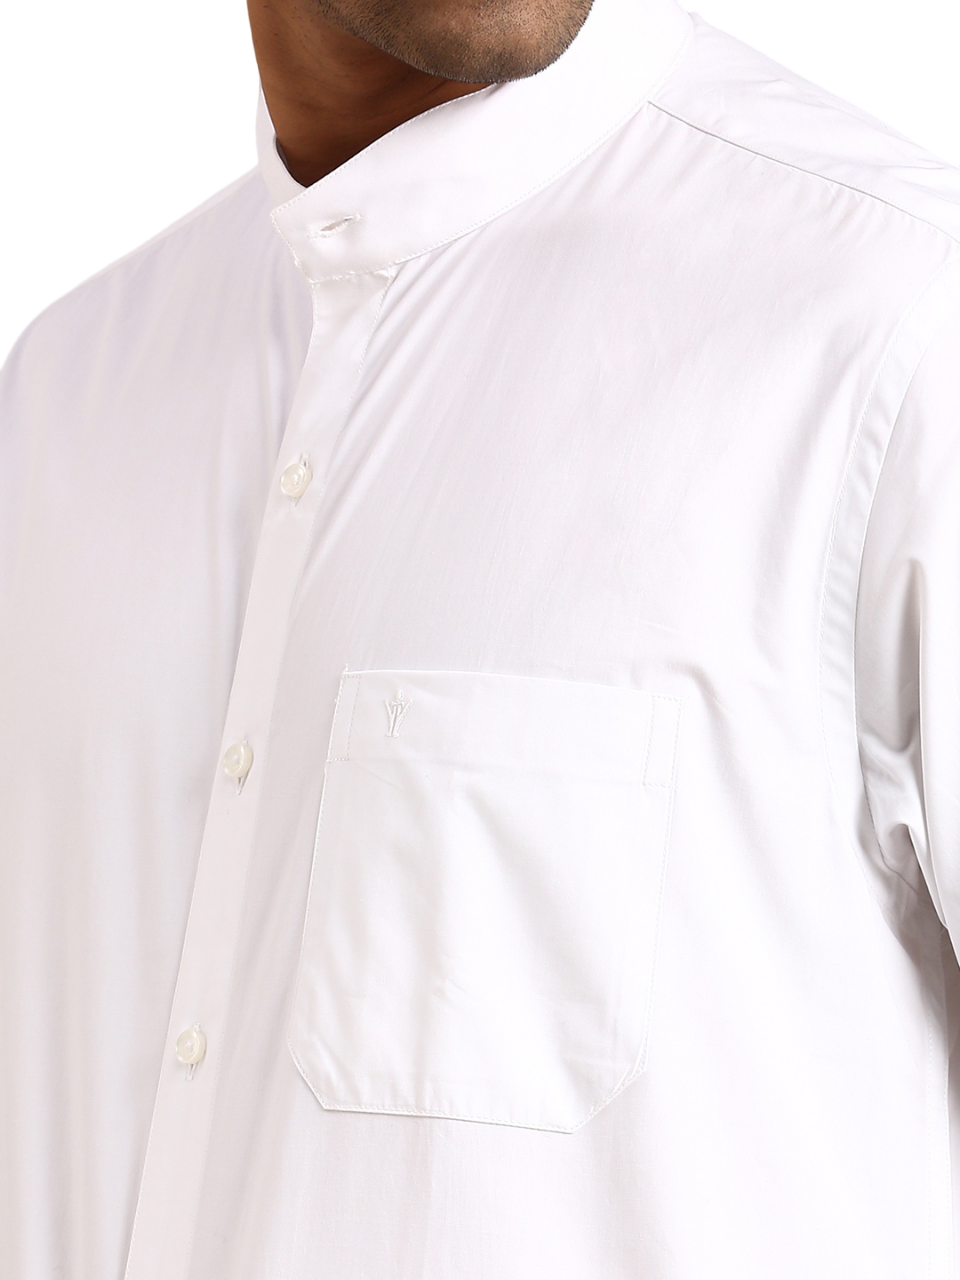 Mens 100% Cotton White Shirt Half Sleeves Chinese Collar -Zoom view